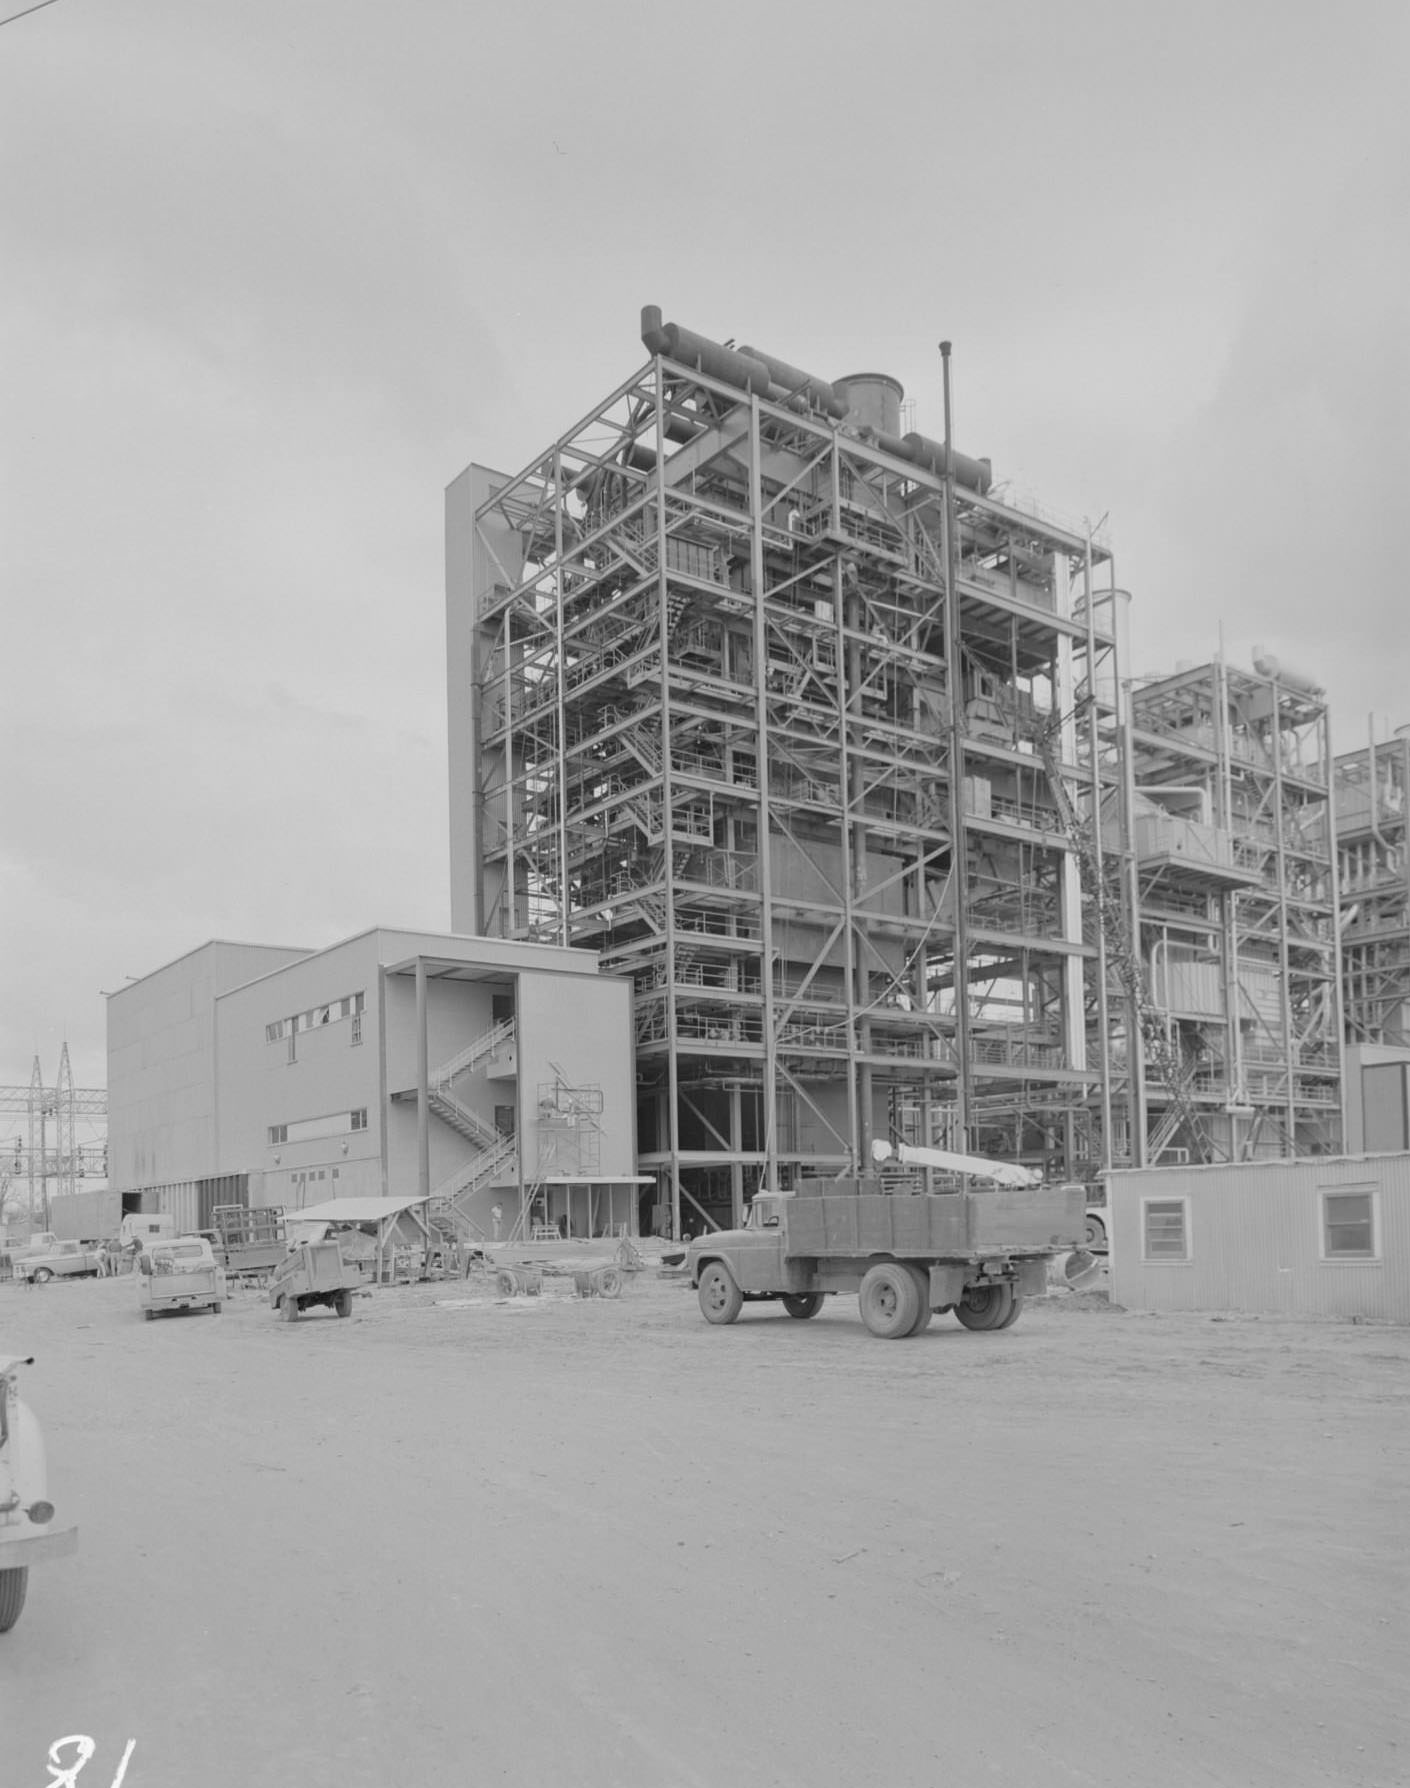 Construction site of Holly St. Power Plant, Austin, 1966